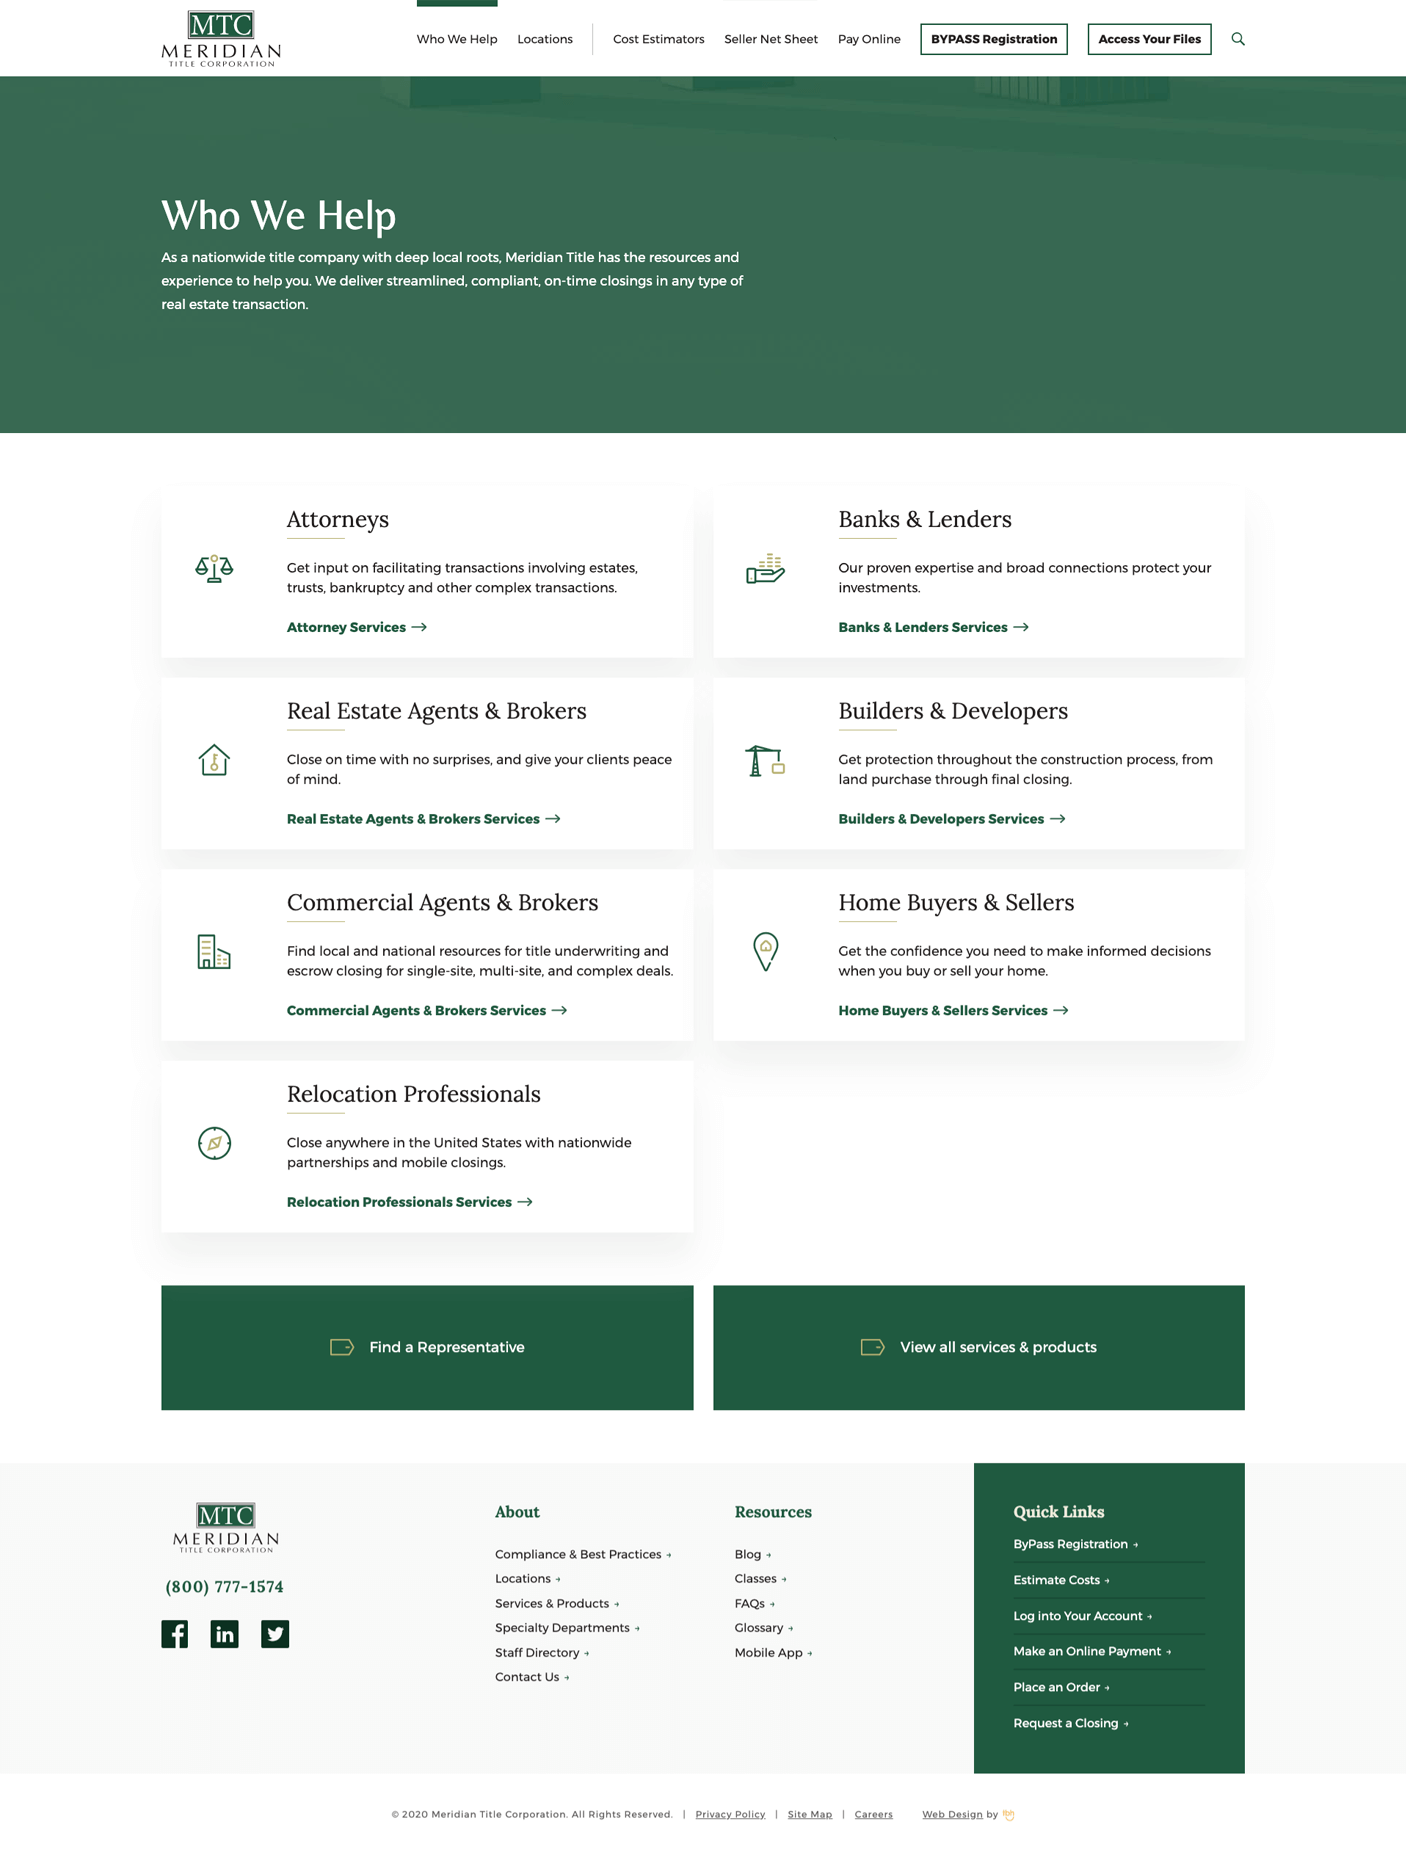 Who We Help landing page